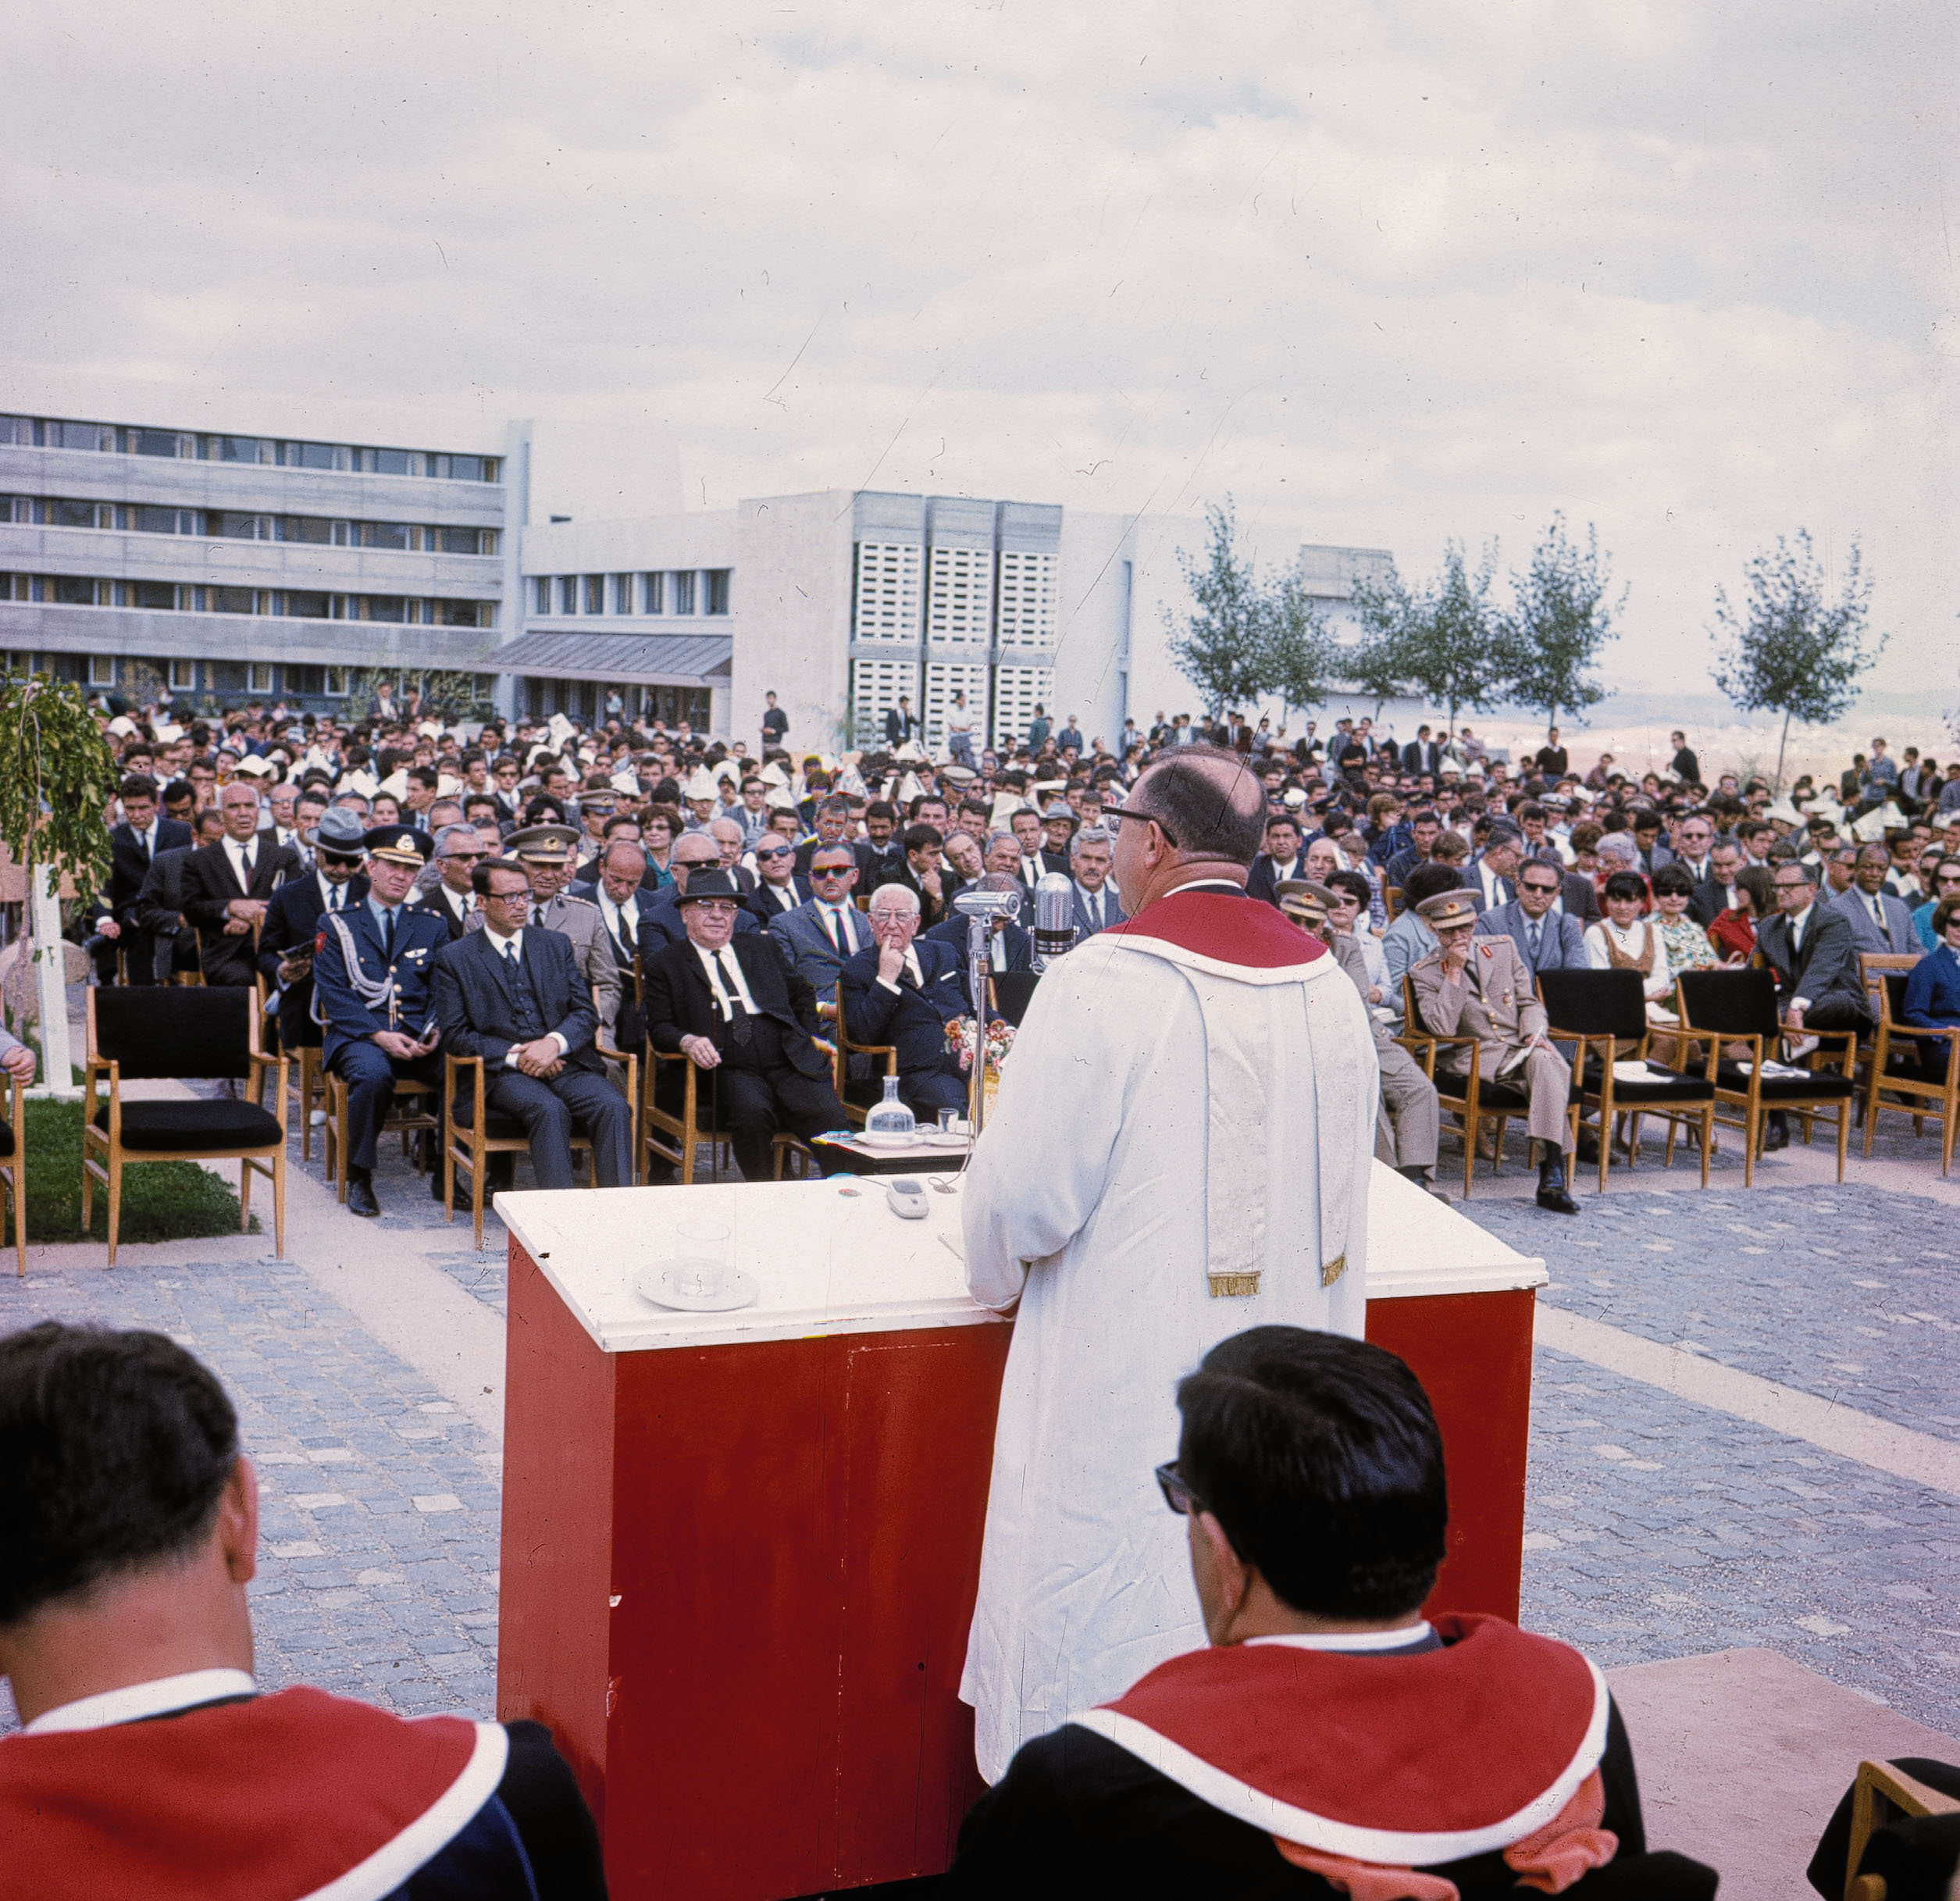 Images of the METU Graduation ceremony held with the participation of soldiers and other visitors in the 1960s